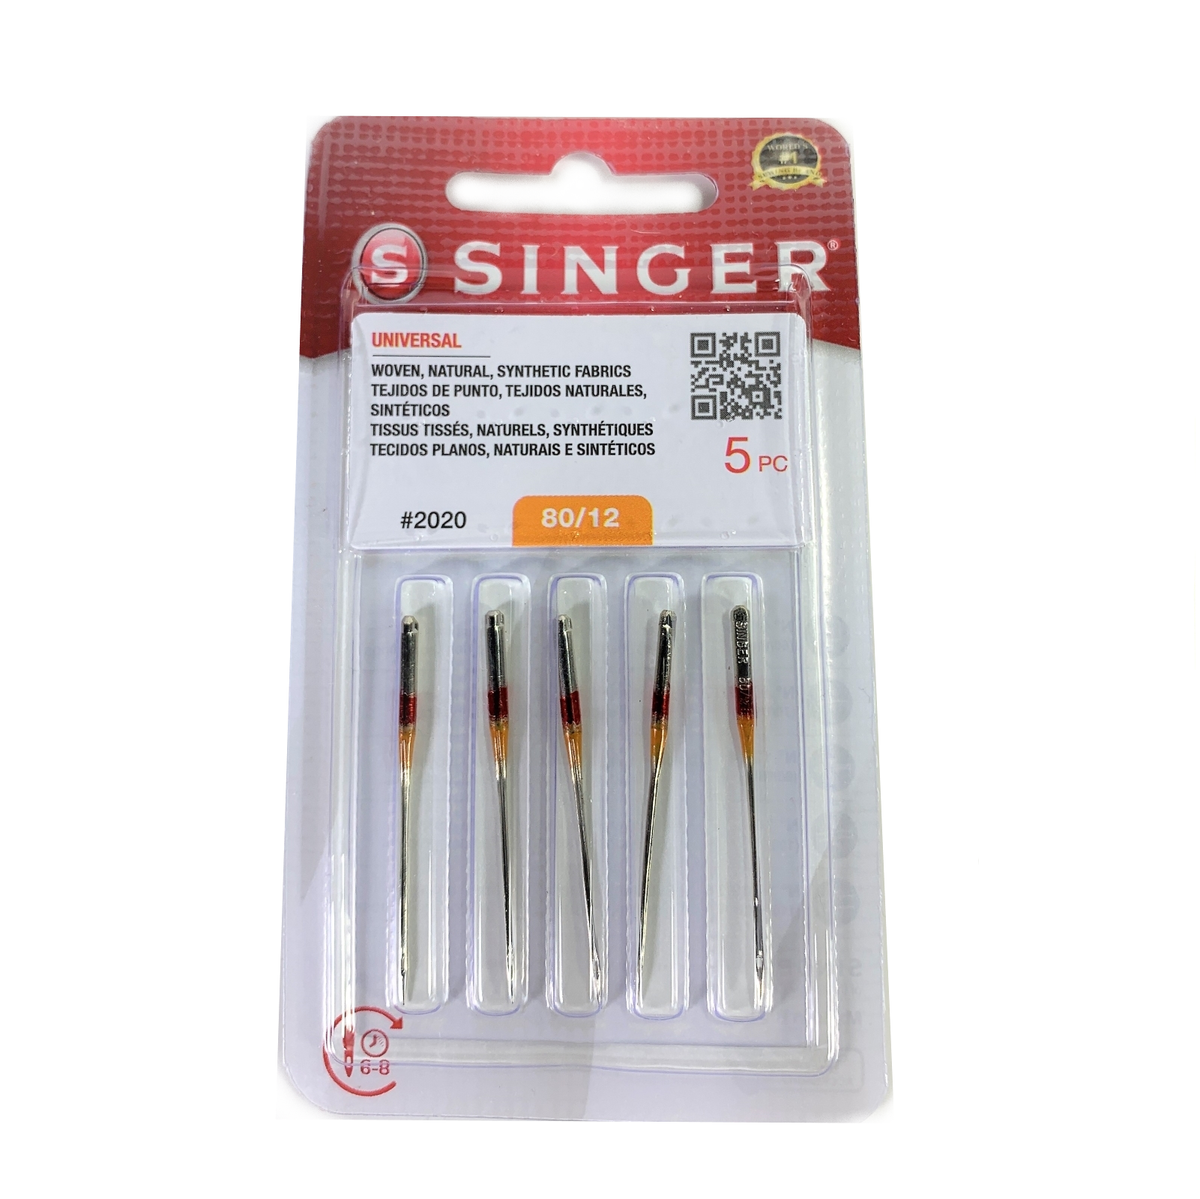 10 SINGER 2020 HOME SEWING MACHINE NEEDLES SIZE #16/100 15X1 HAX1 130/705H